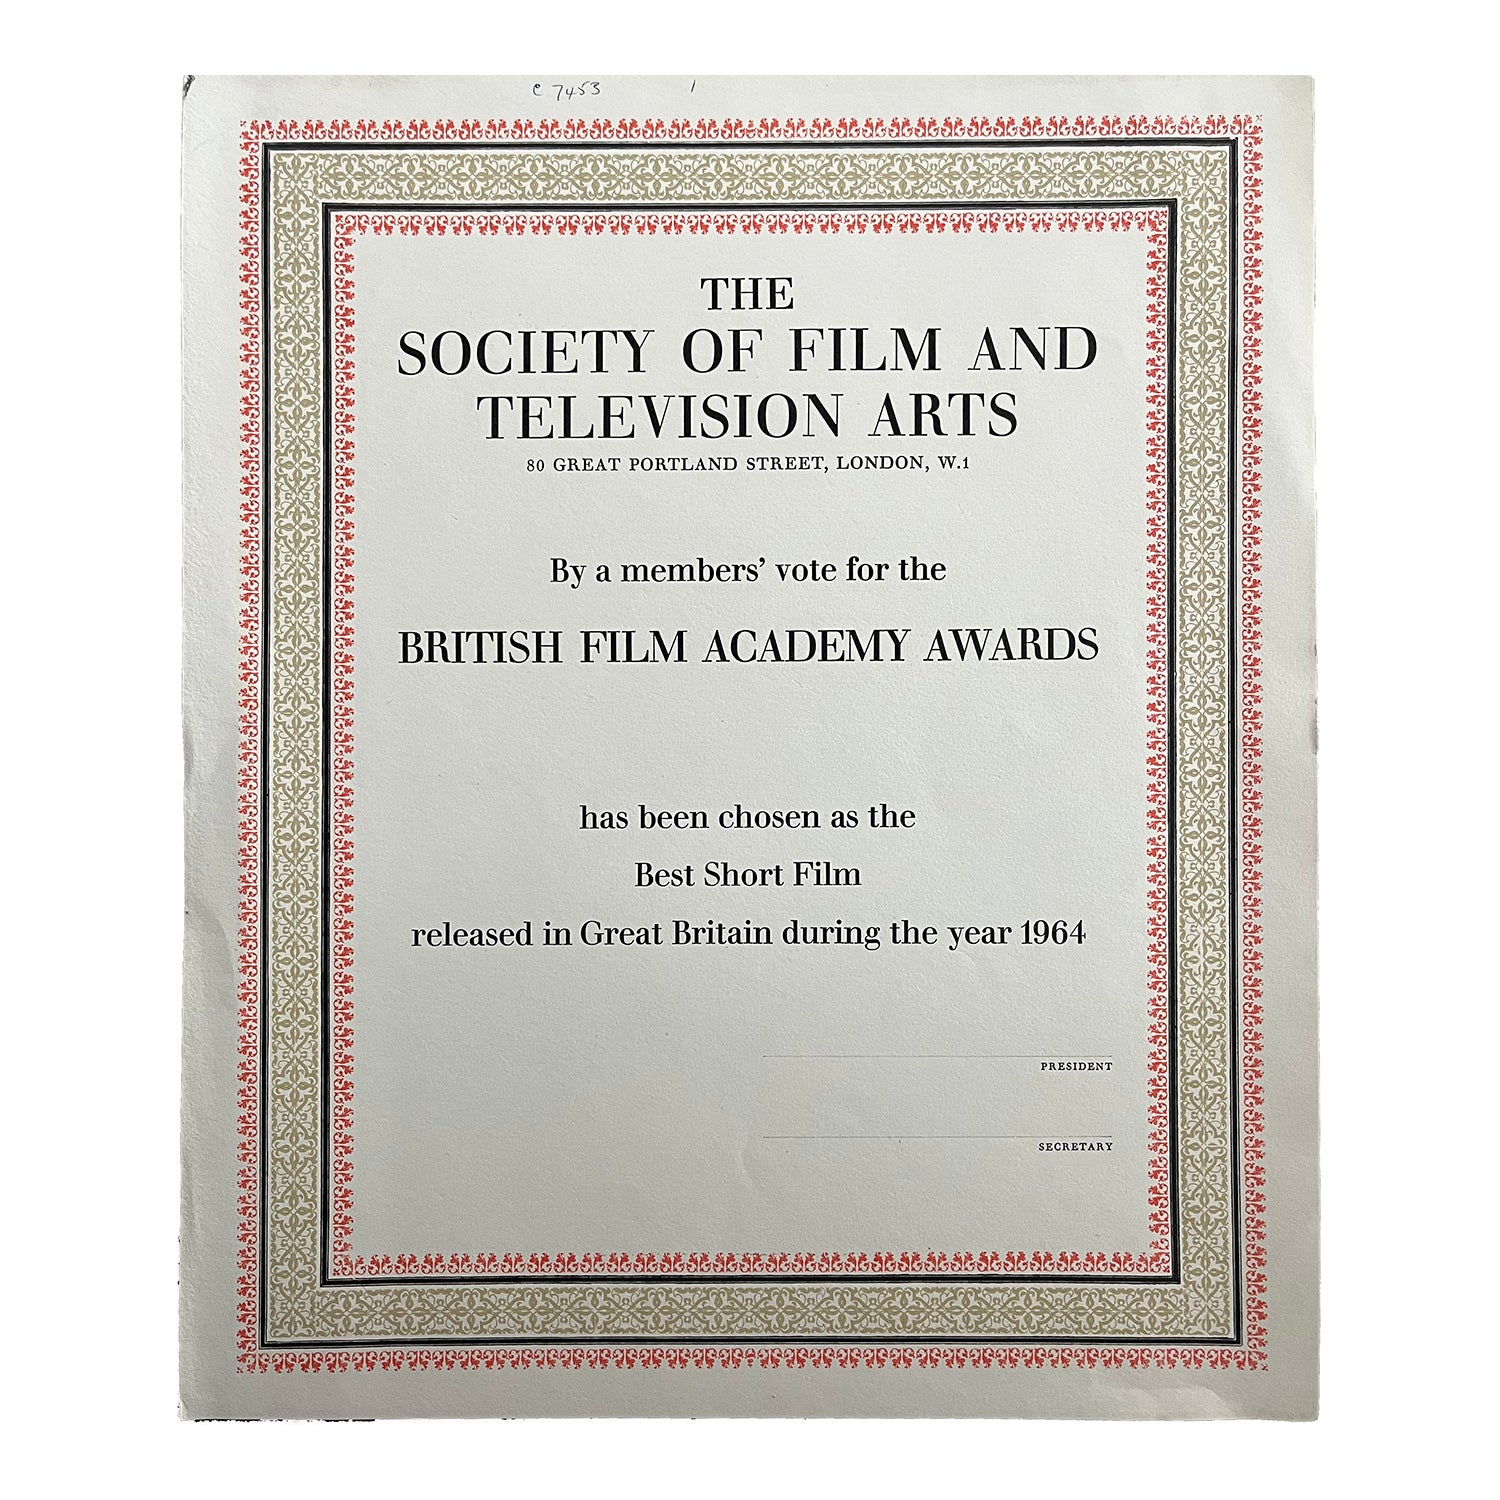 original unissued proof certificate for the British Academy Awards, Best Short Film released in Great Britain during the year 1964. Printed at the Curwen Press